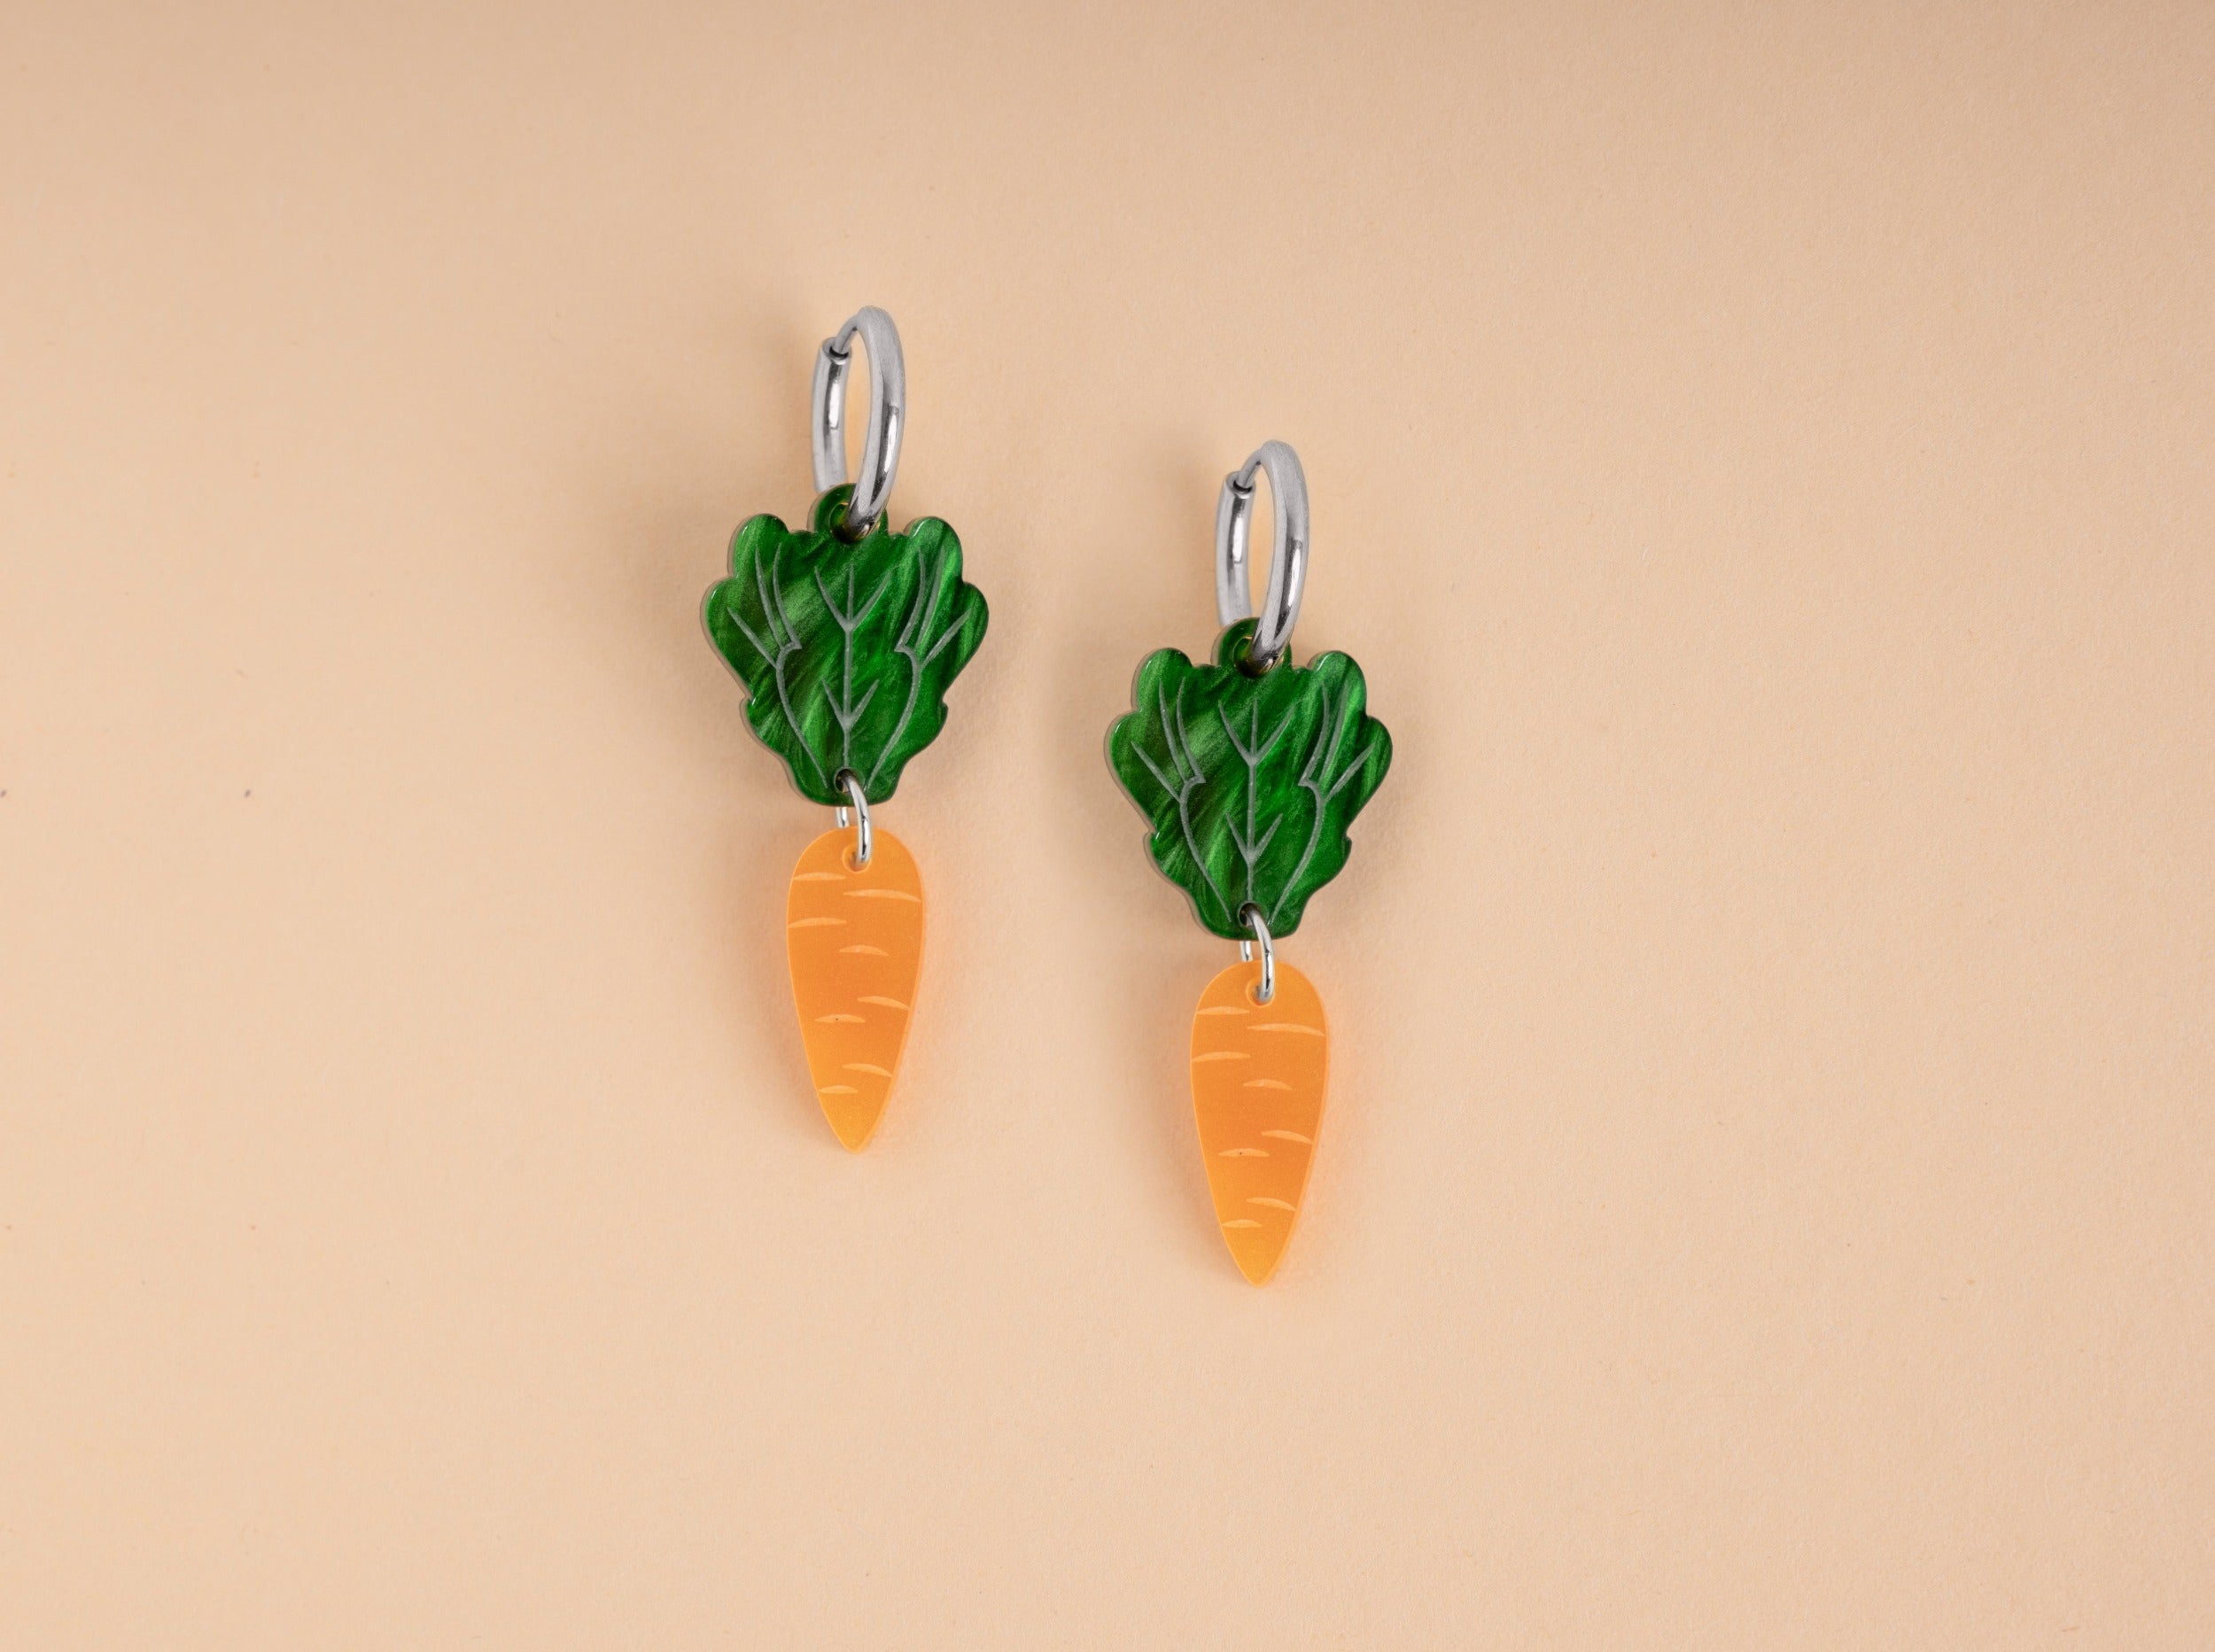 Carrot earrings with stainless steel hoops